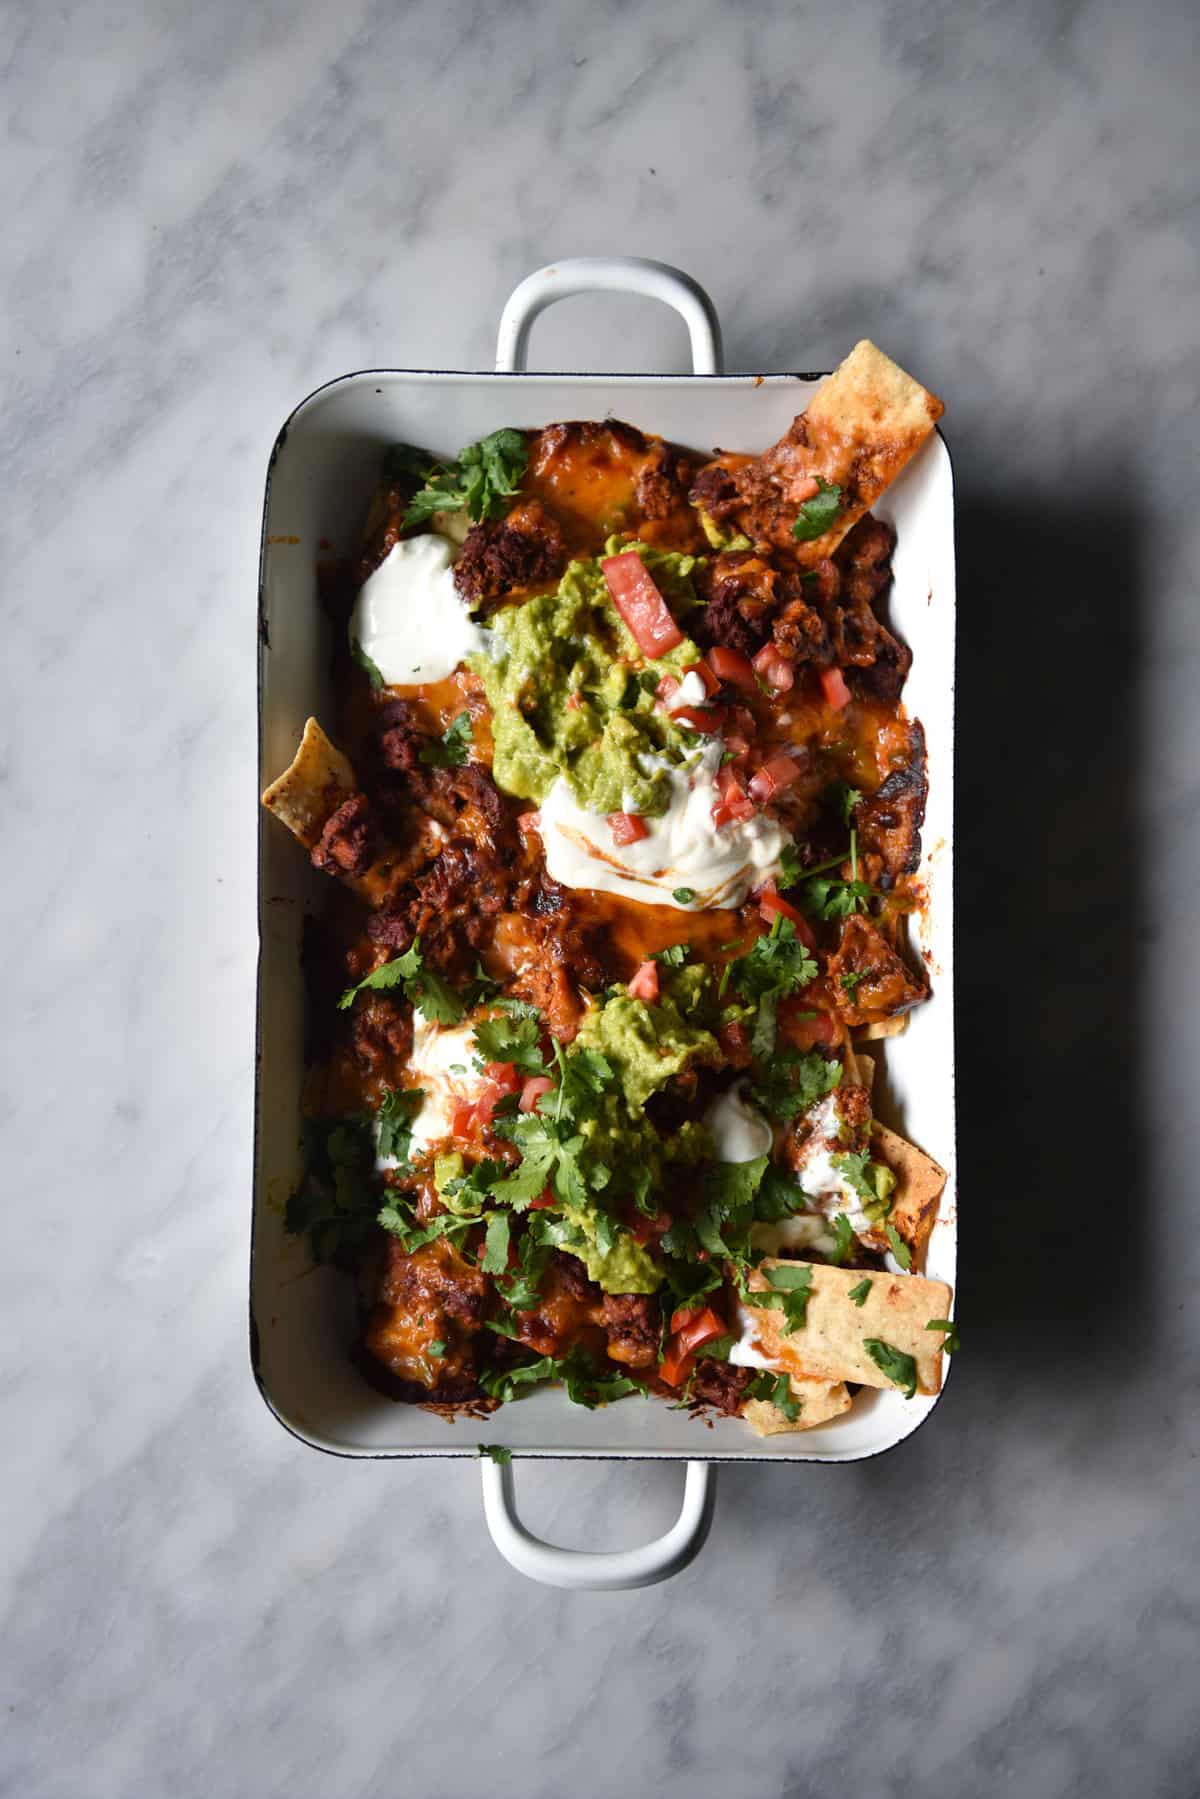 FODMAP friendly vegetarian nachos with chilli, queso and guacamole from www.georgeats.com